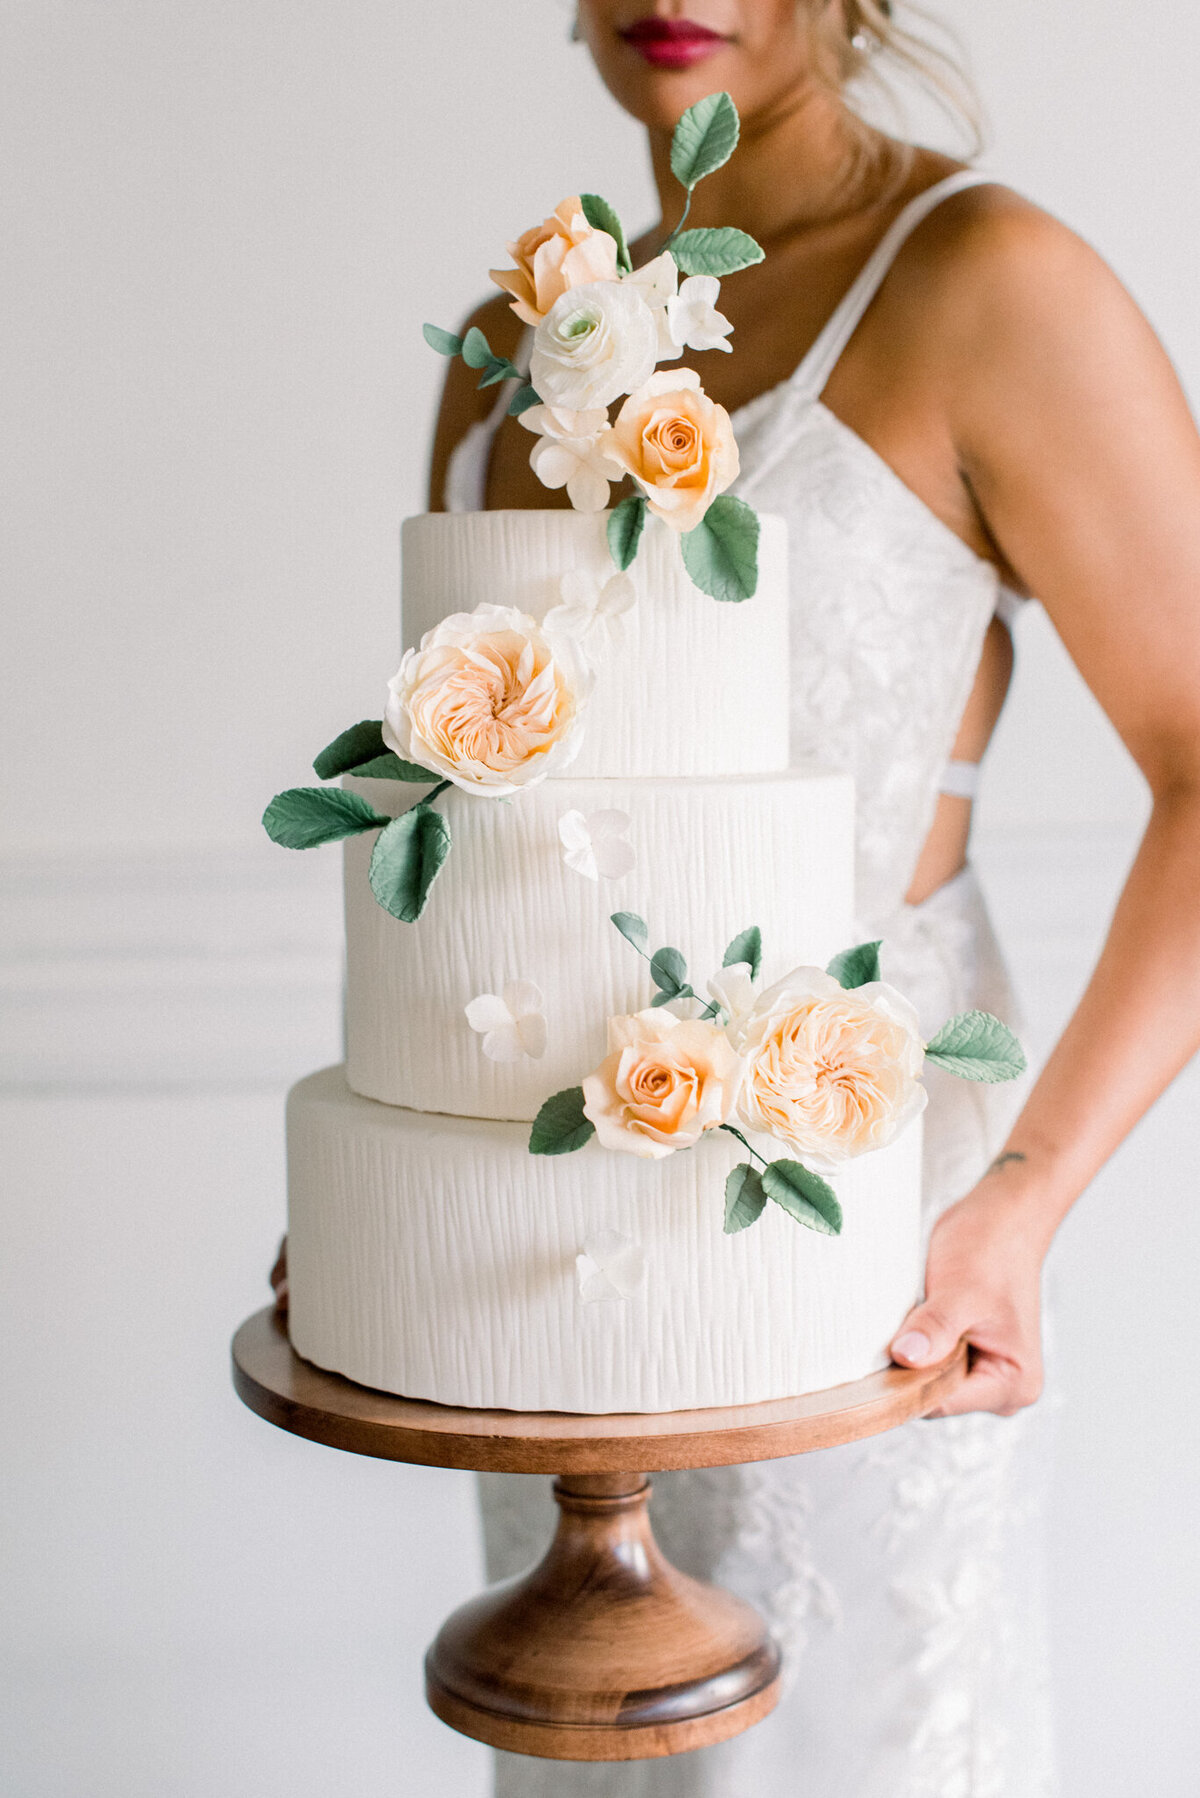 Romantic and elegant three-tiered white textured wedding cake, decorated with hand-crafted peach sugar roses, created by Brianne Gabrielle Cakes,  elegant cakes & desserts in Edmonton, AB, featured on the Brontë Bride Vendor Guide.